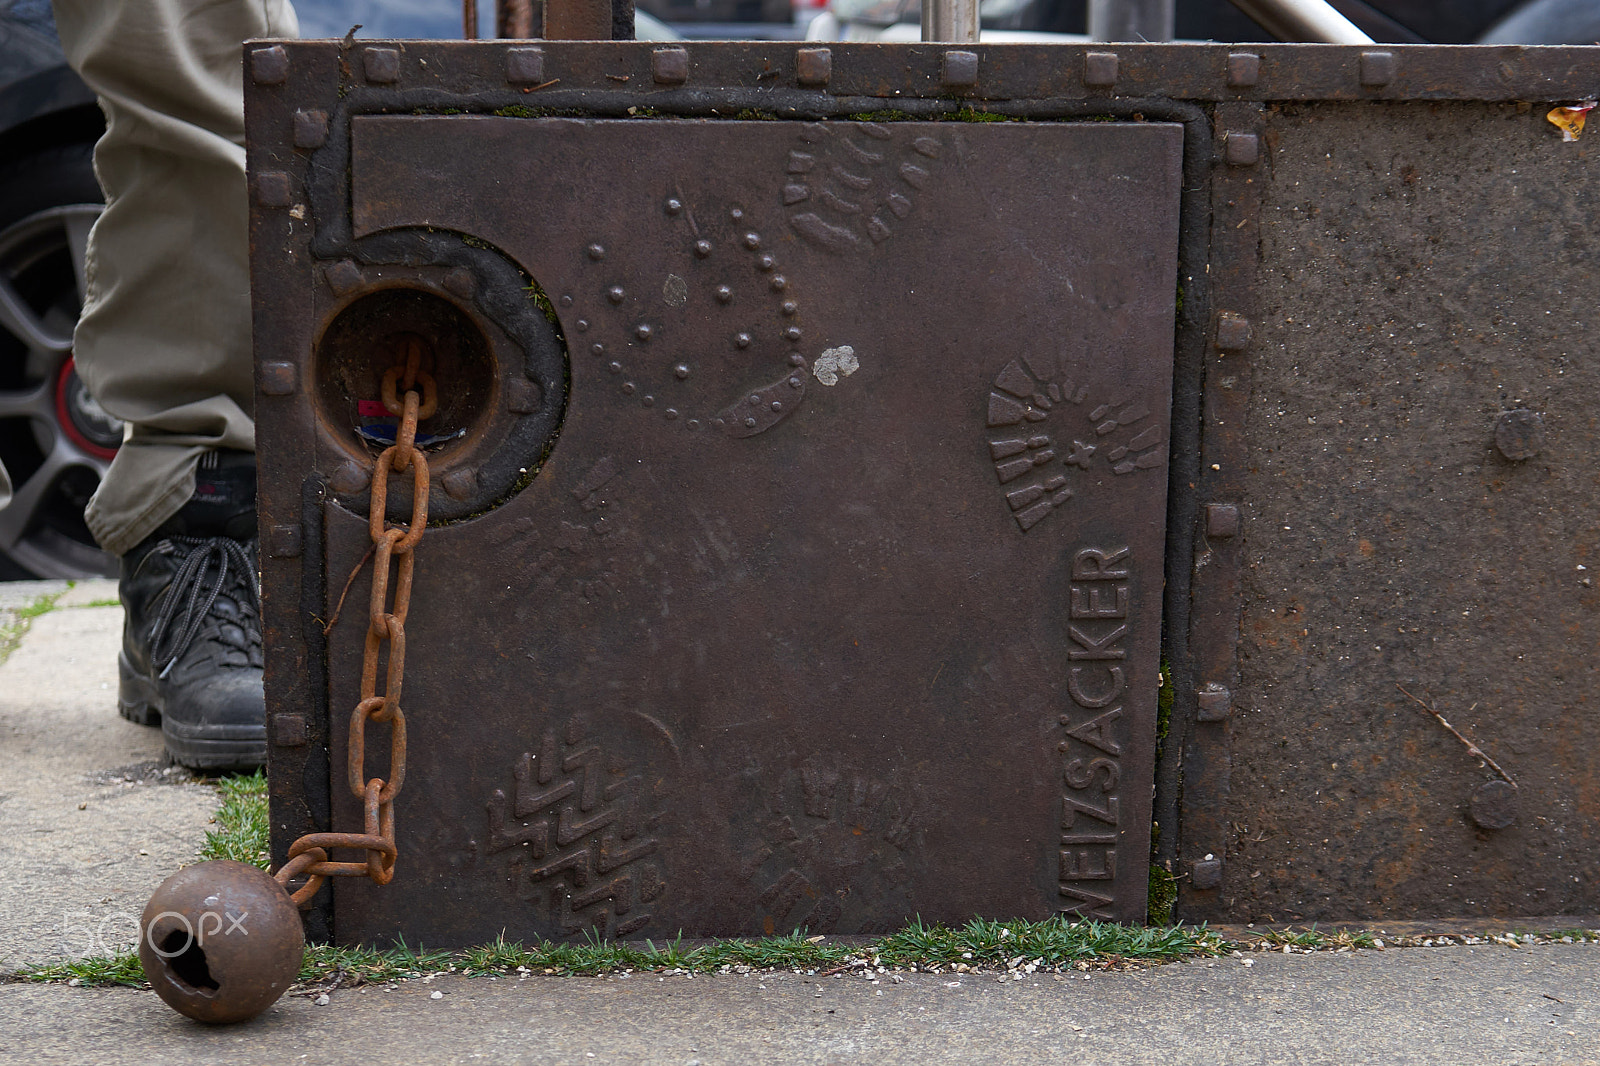 Sony a7 sample photo. Lock and foot prints entrance door sewerage photography